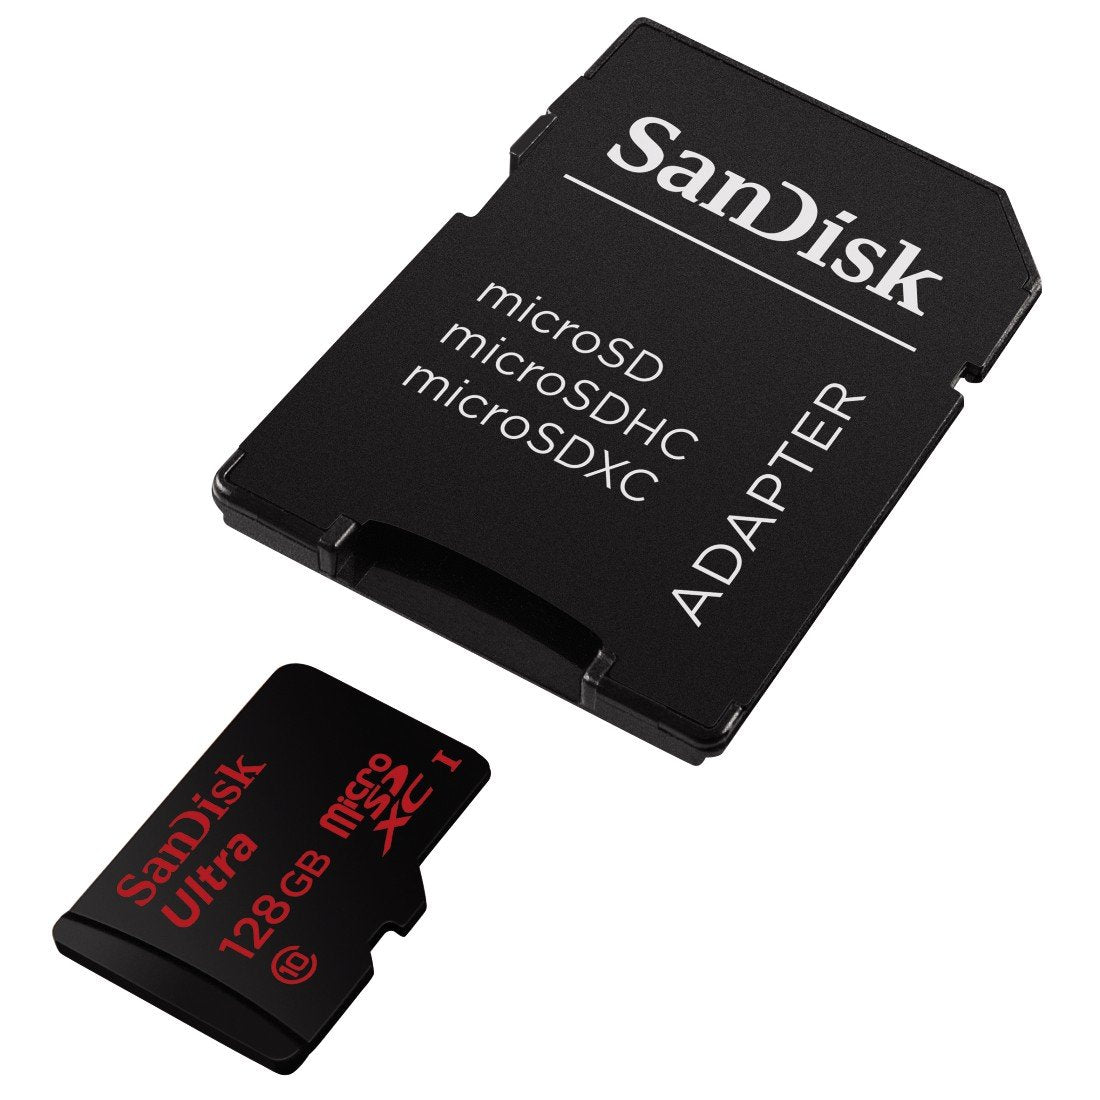 SanDisk Ultra 128GB UHS-I/Class 10 Micro SDXC Memory Card Up To 48MB/s With Adapter- SDSQUNC-128G